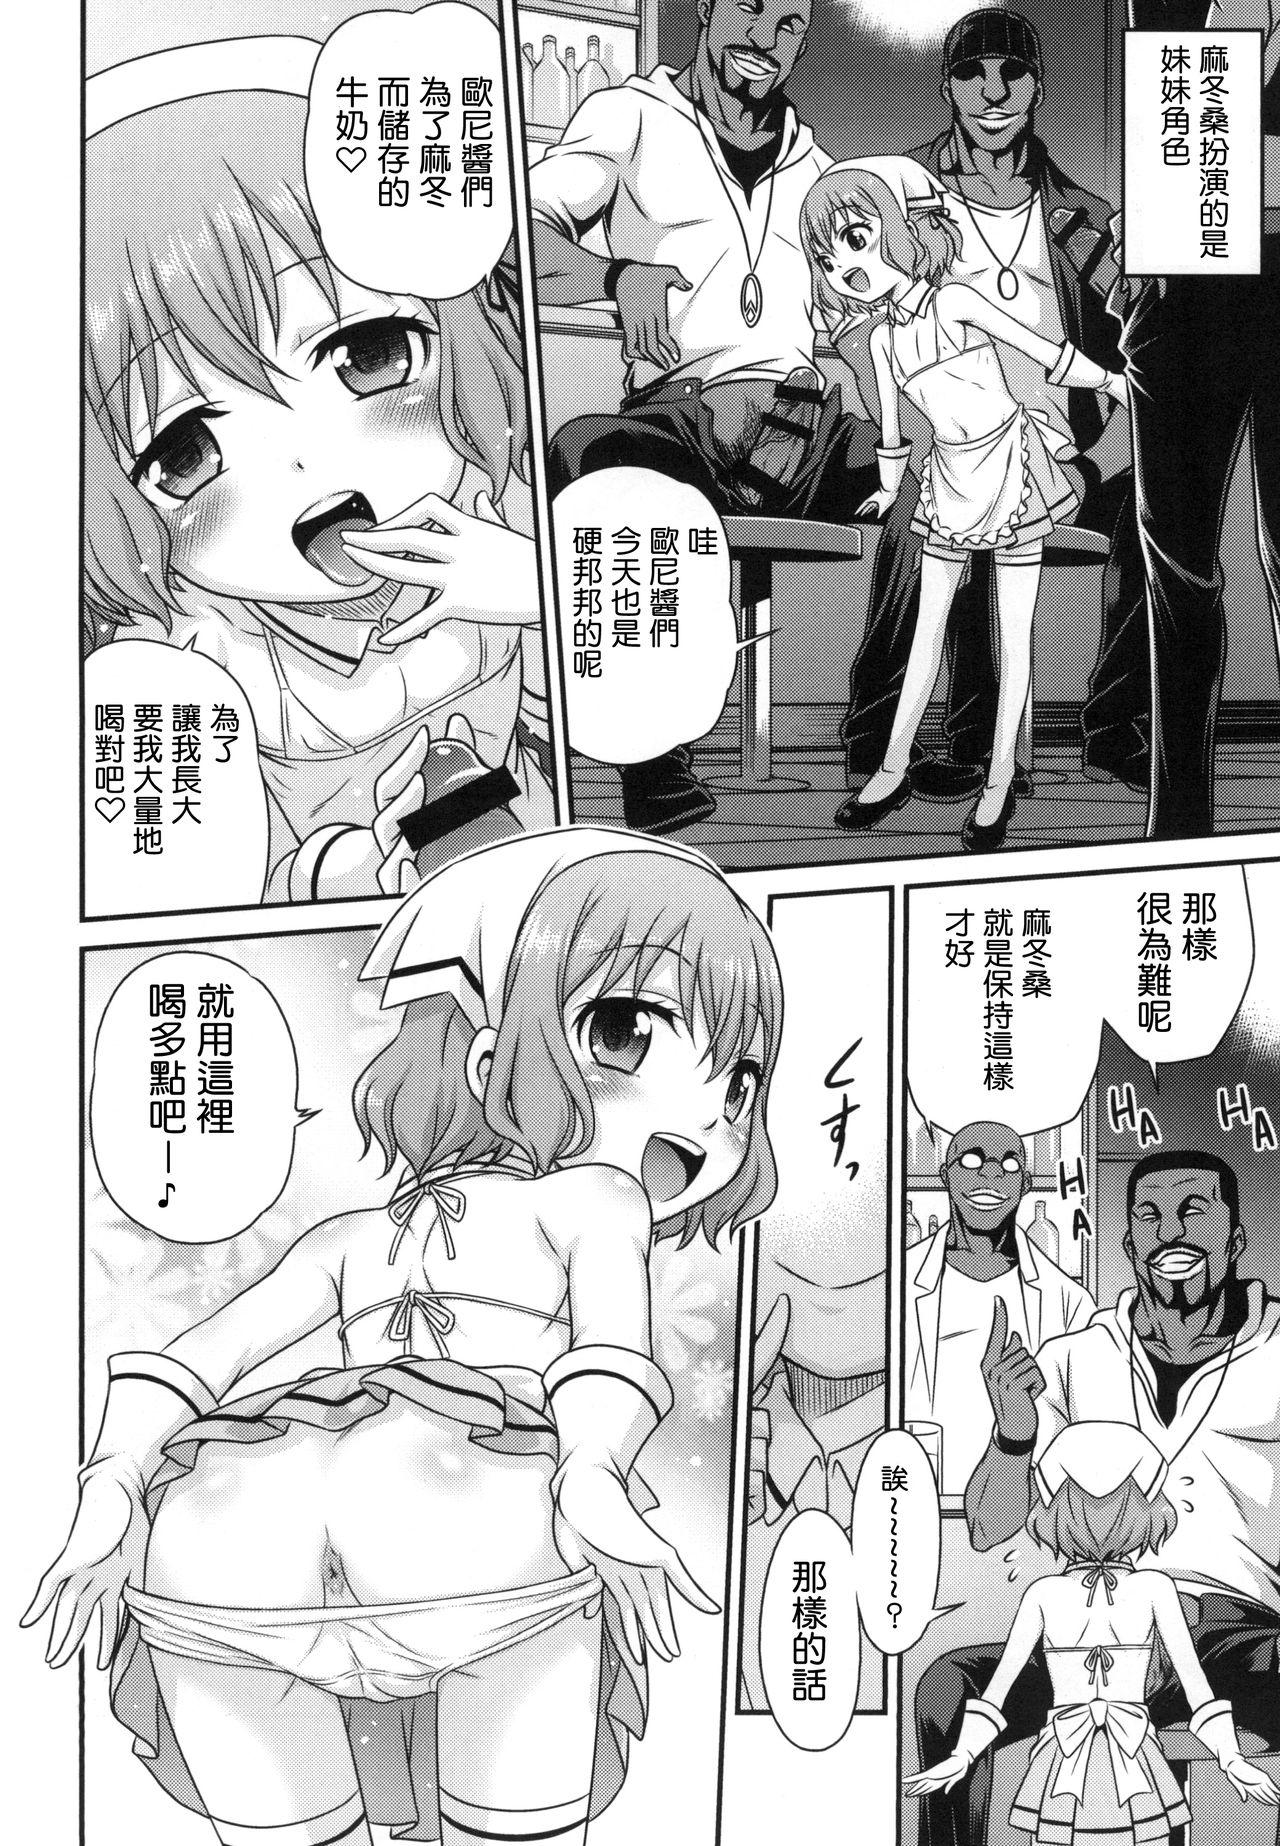 Interacial YOU no Atsumaru Omise!! - Blend s Hottie - Page 9